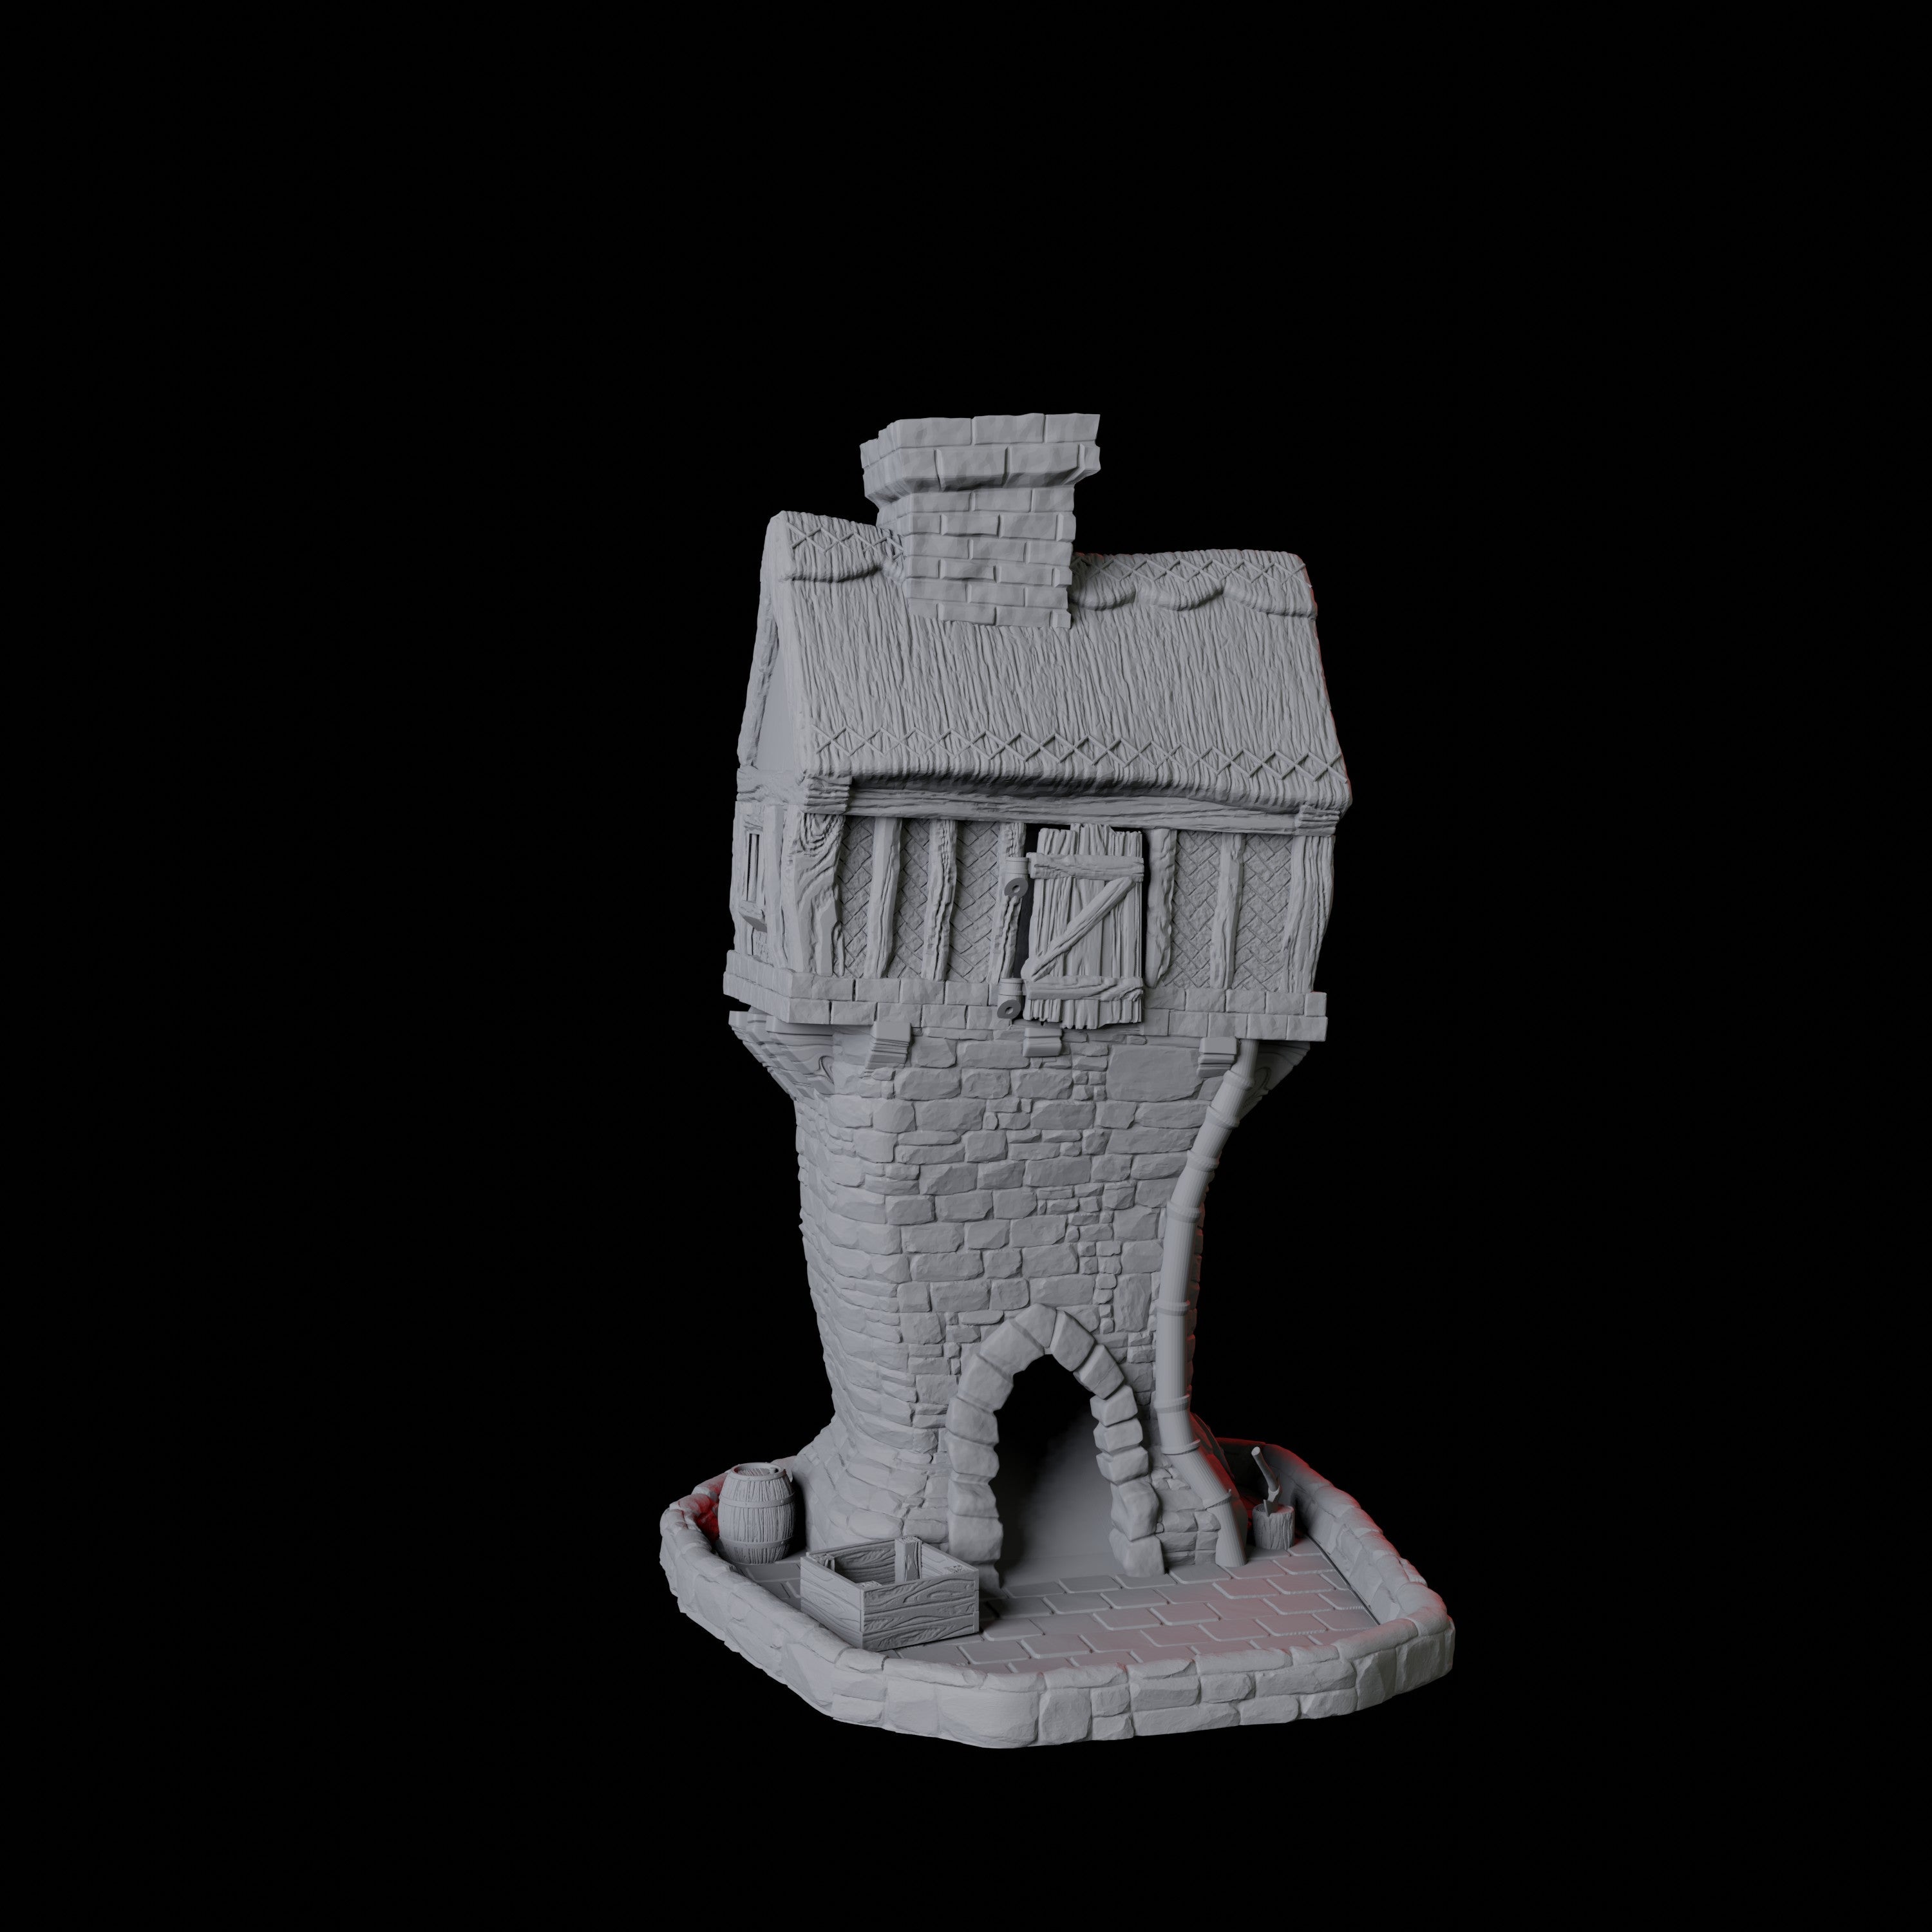 Thatched Cottage Dice Tower Miniature for Dungeons and Dragons